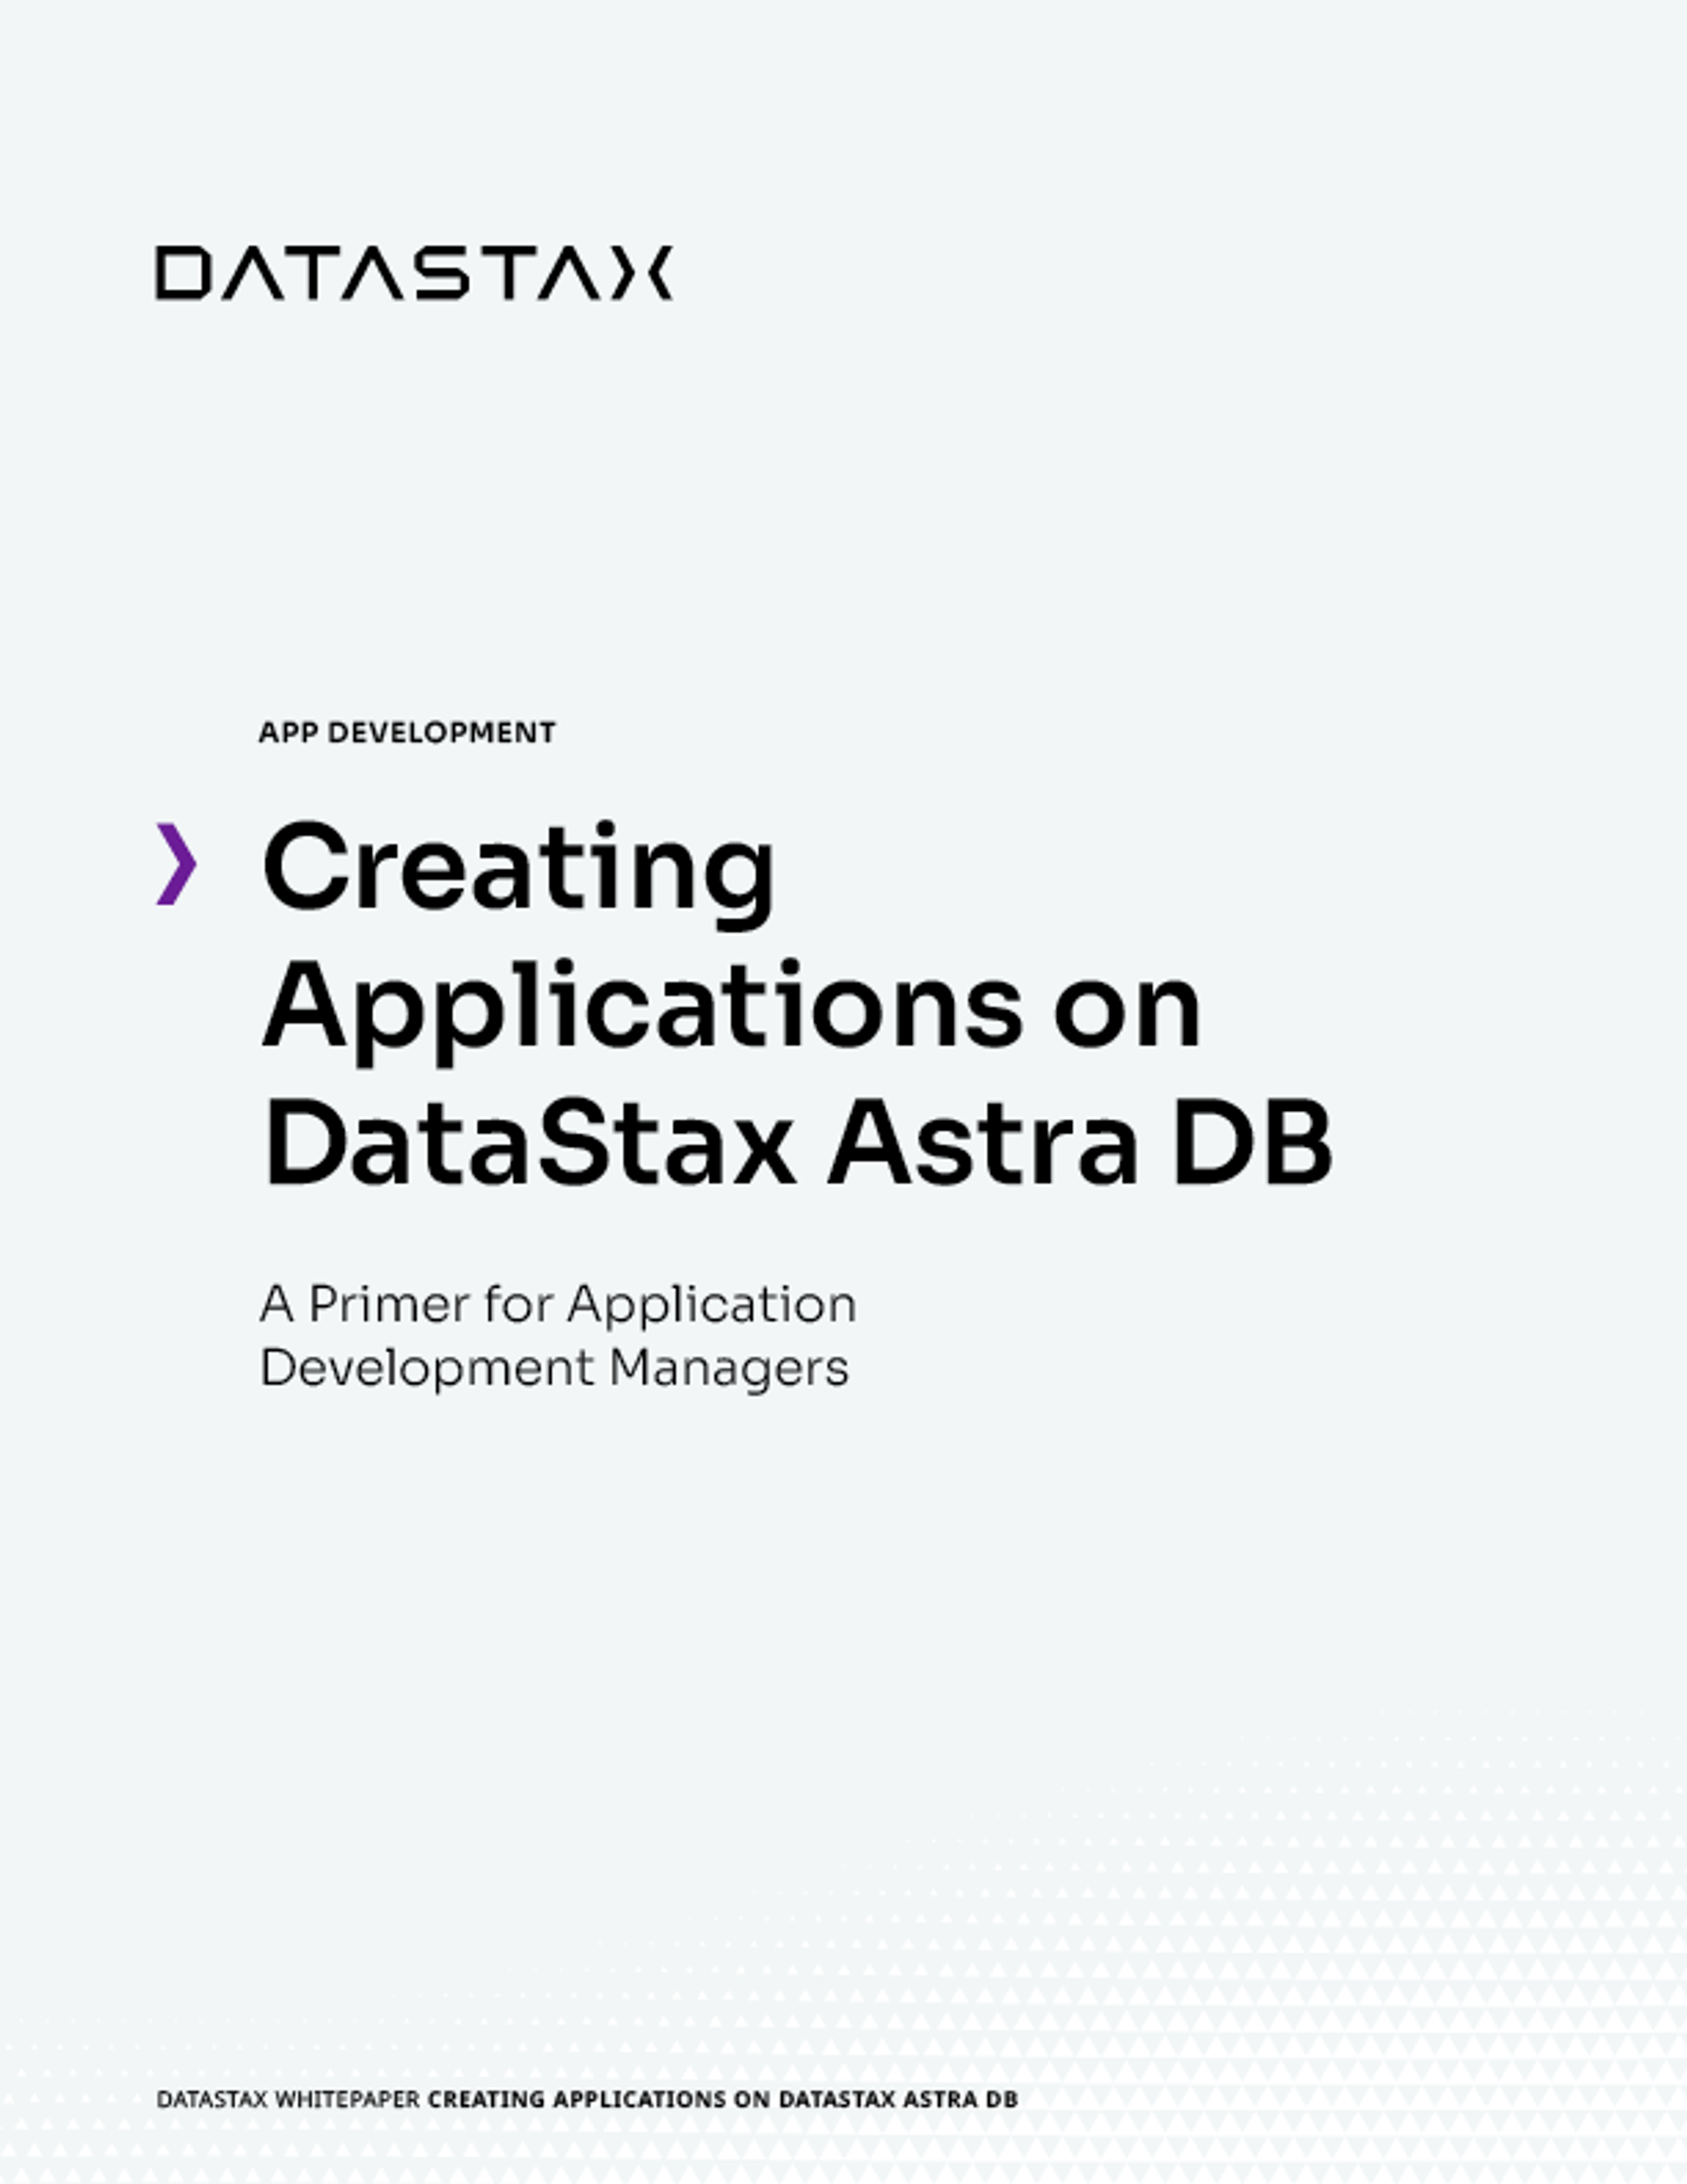 Why Astra DB is the best choice for creating apps